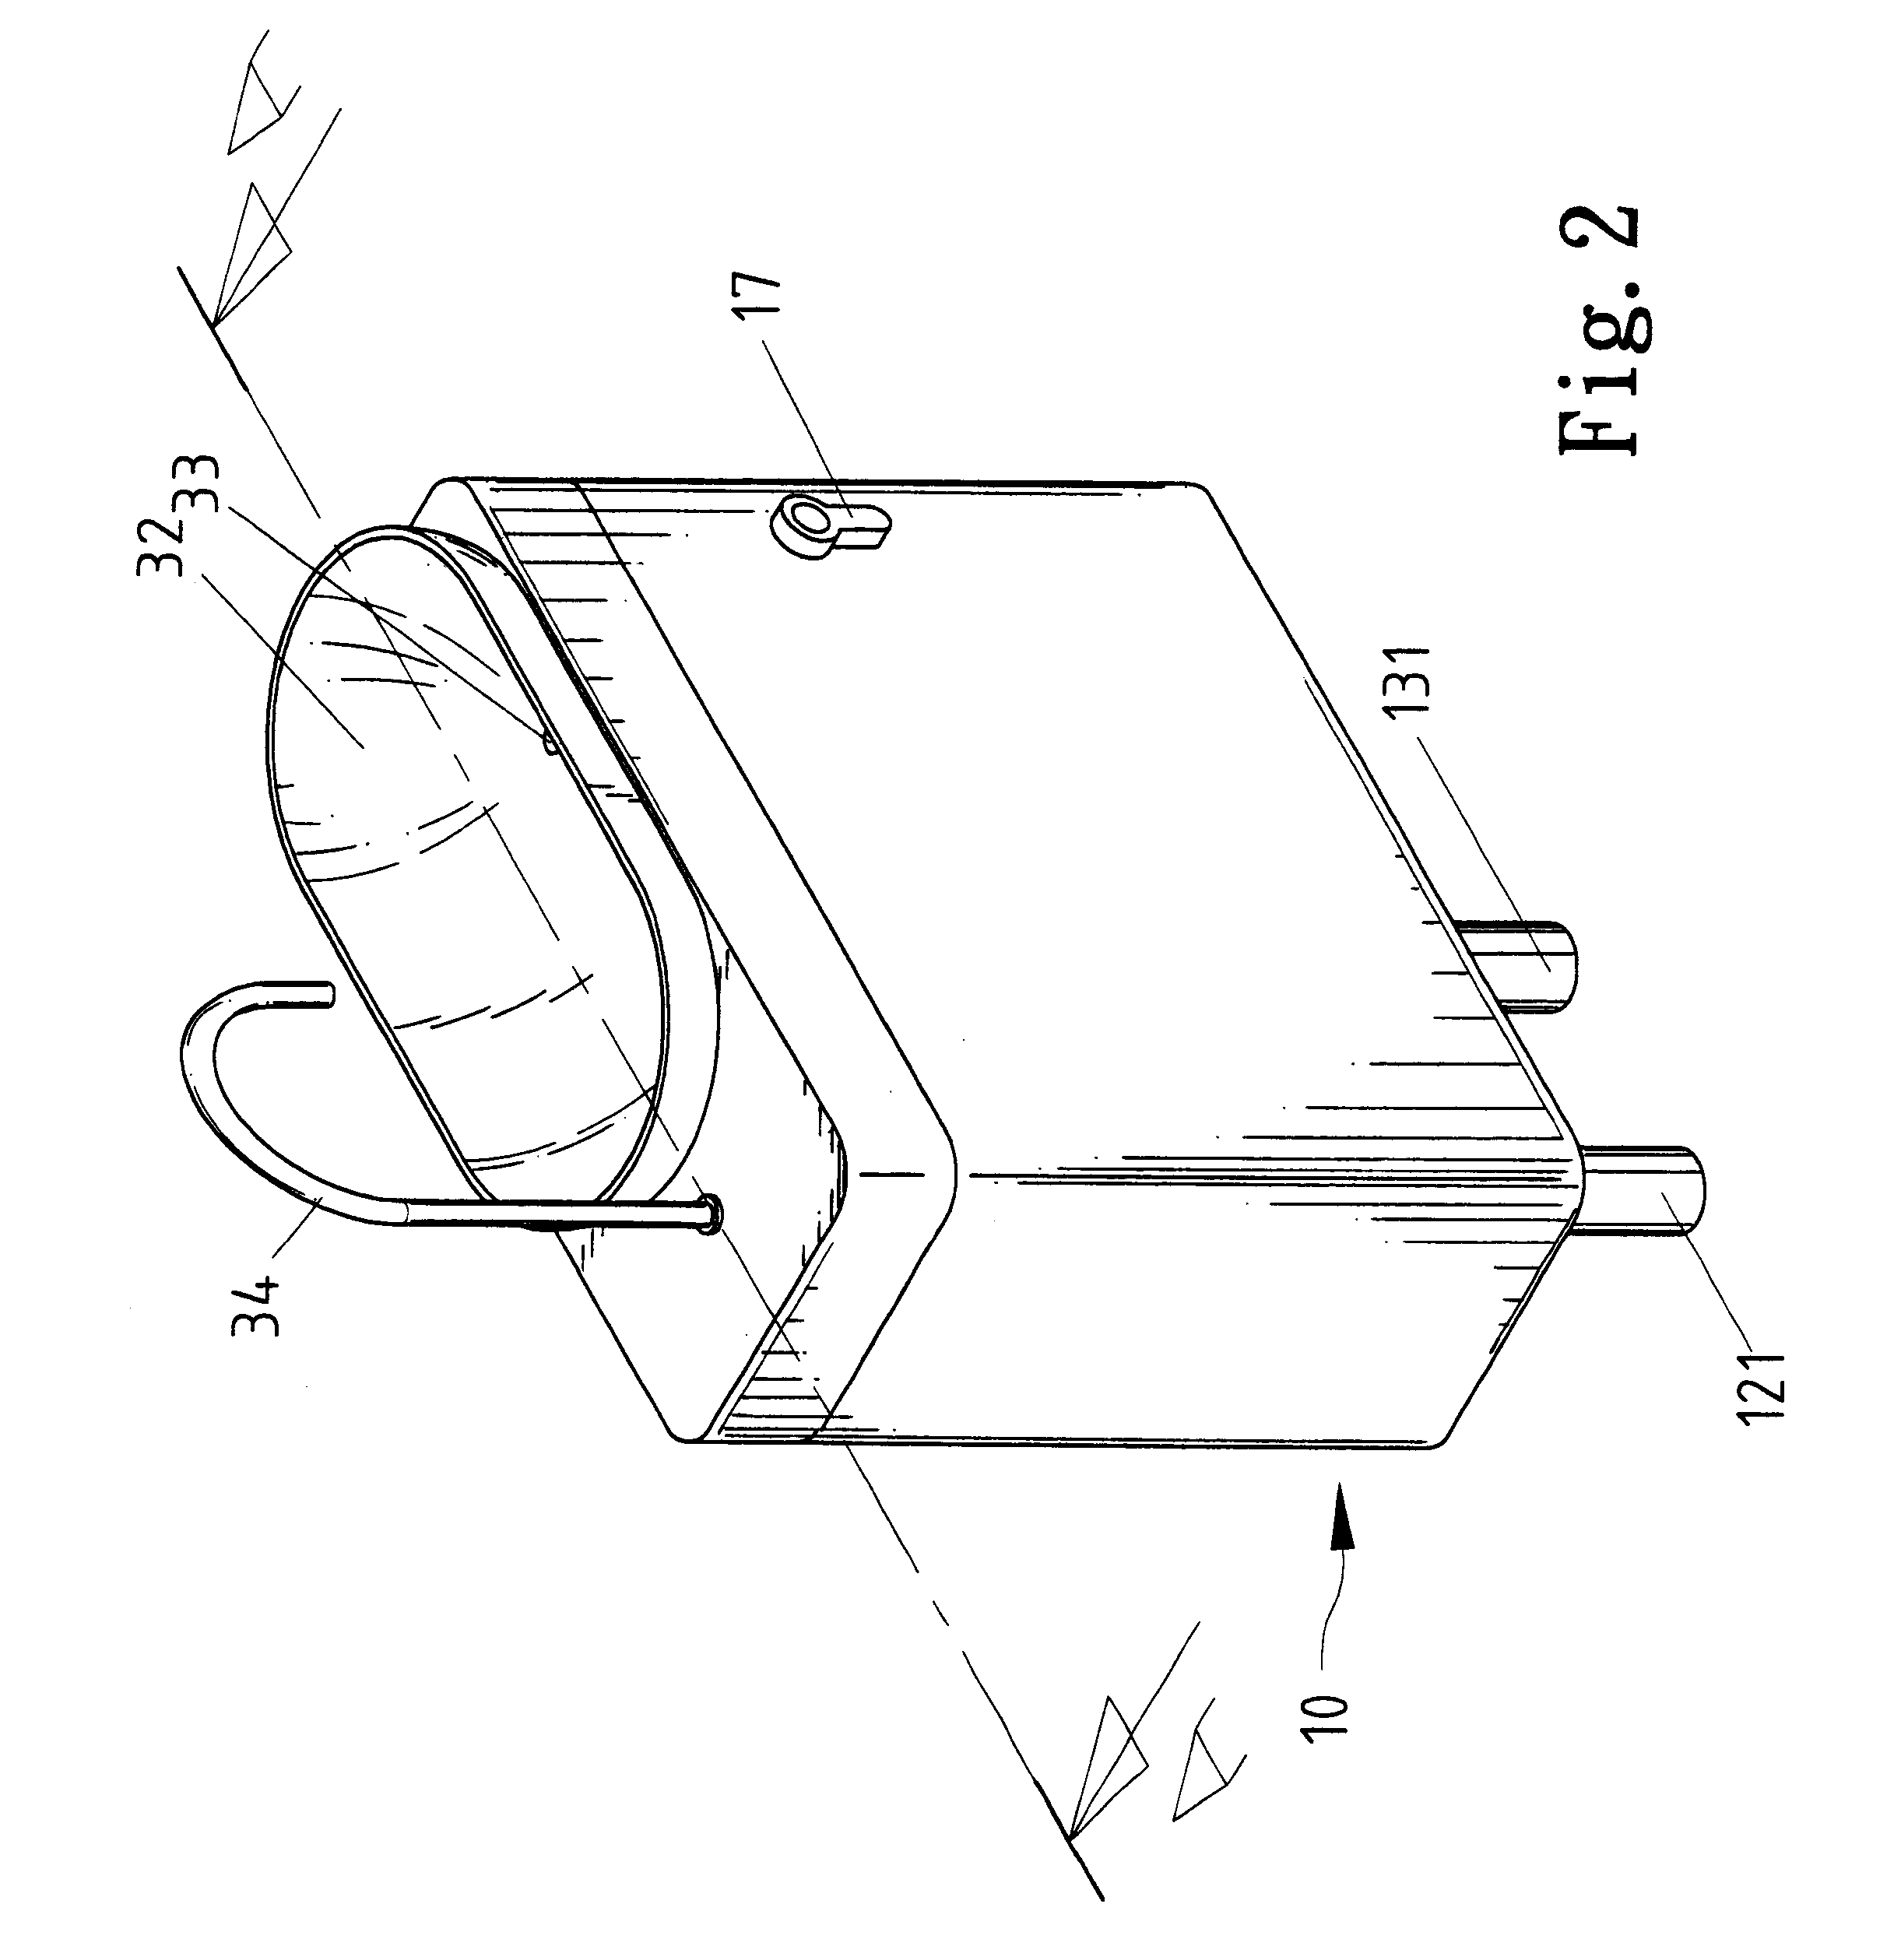 Water-saving device for a toilet having a sink with a float-operated drain valve